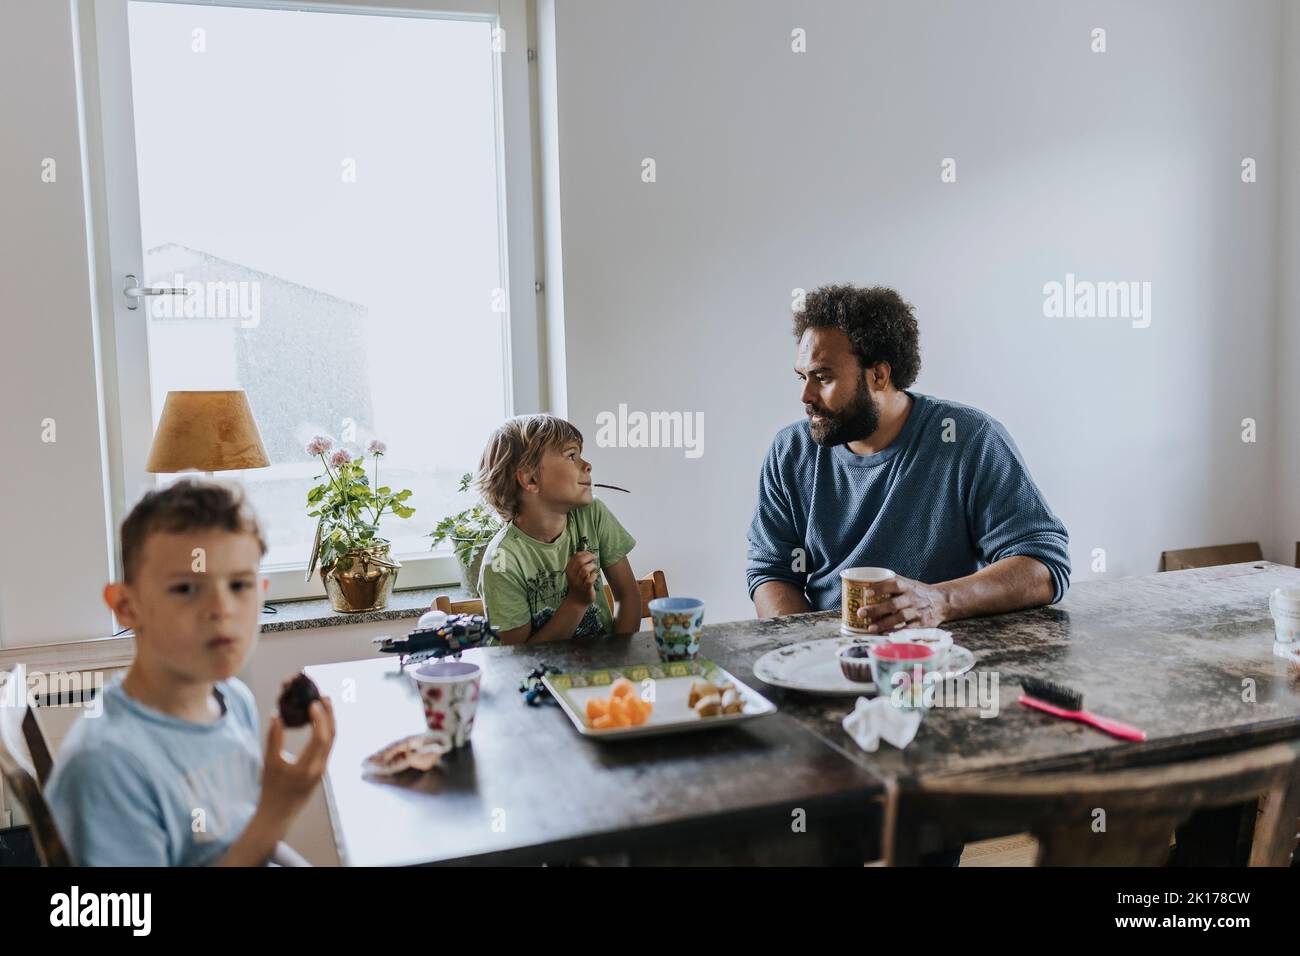 Father and children eating at table Stock Photo